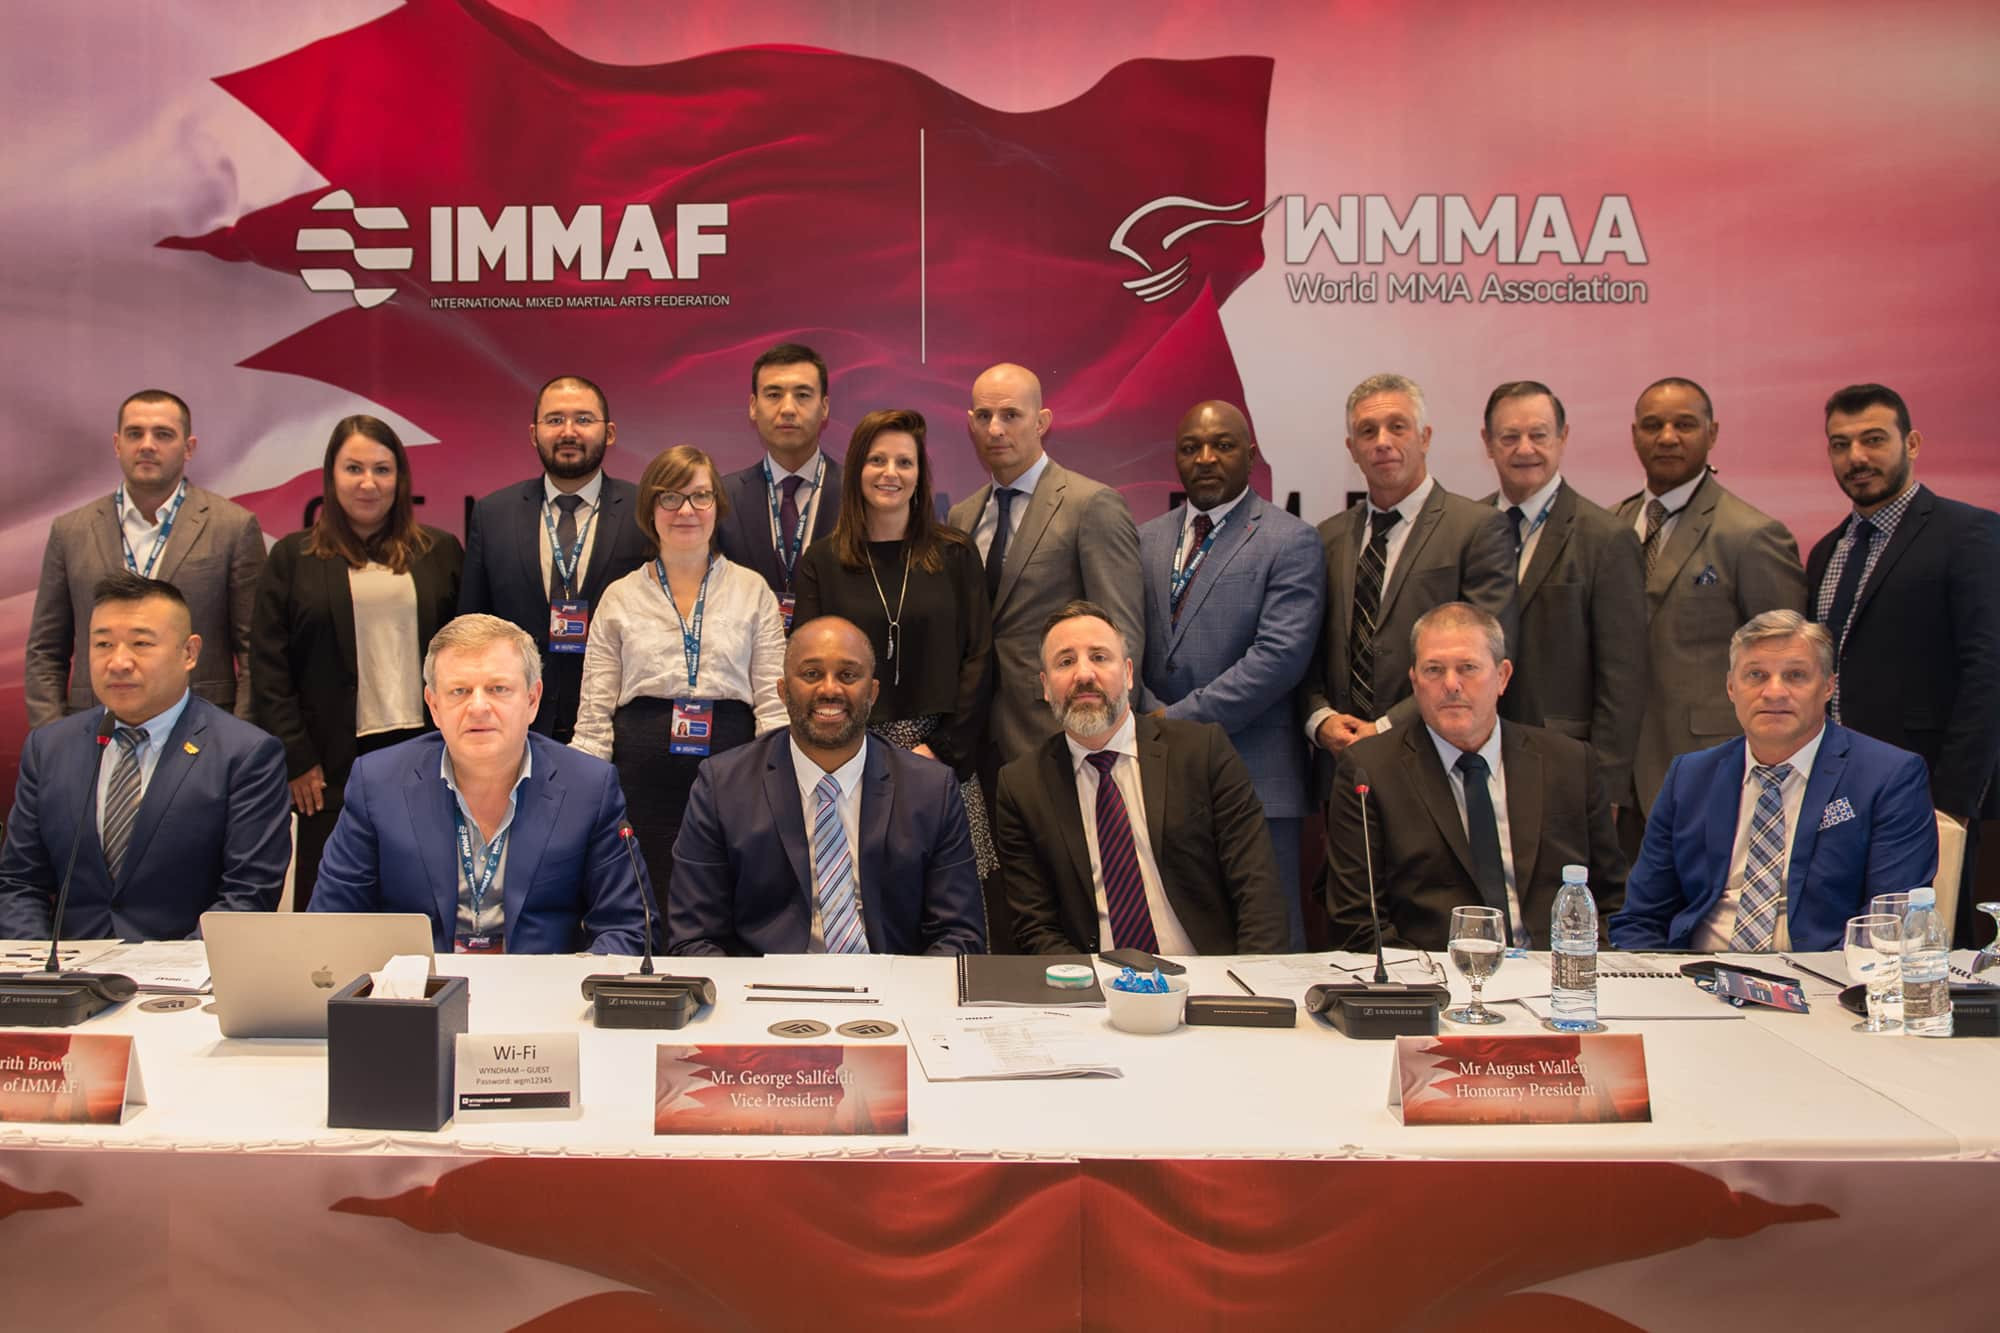 IMMAF Board set to participate in good governance training